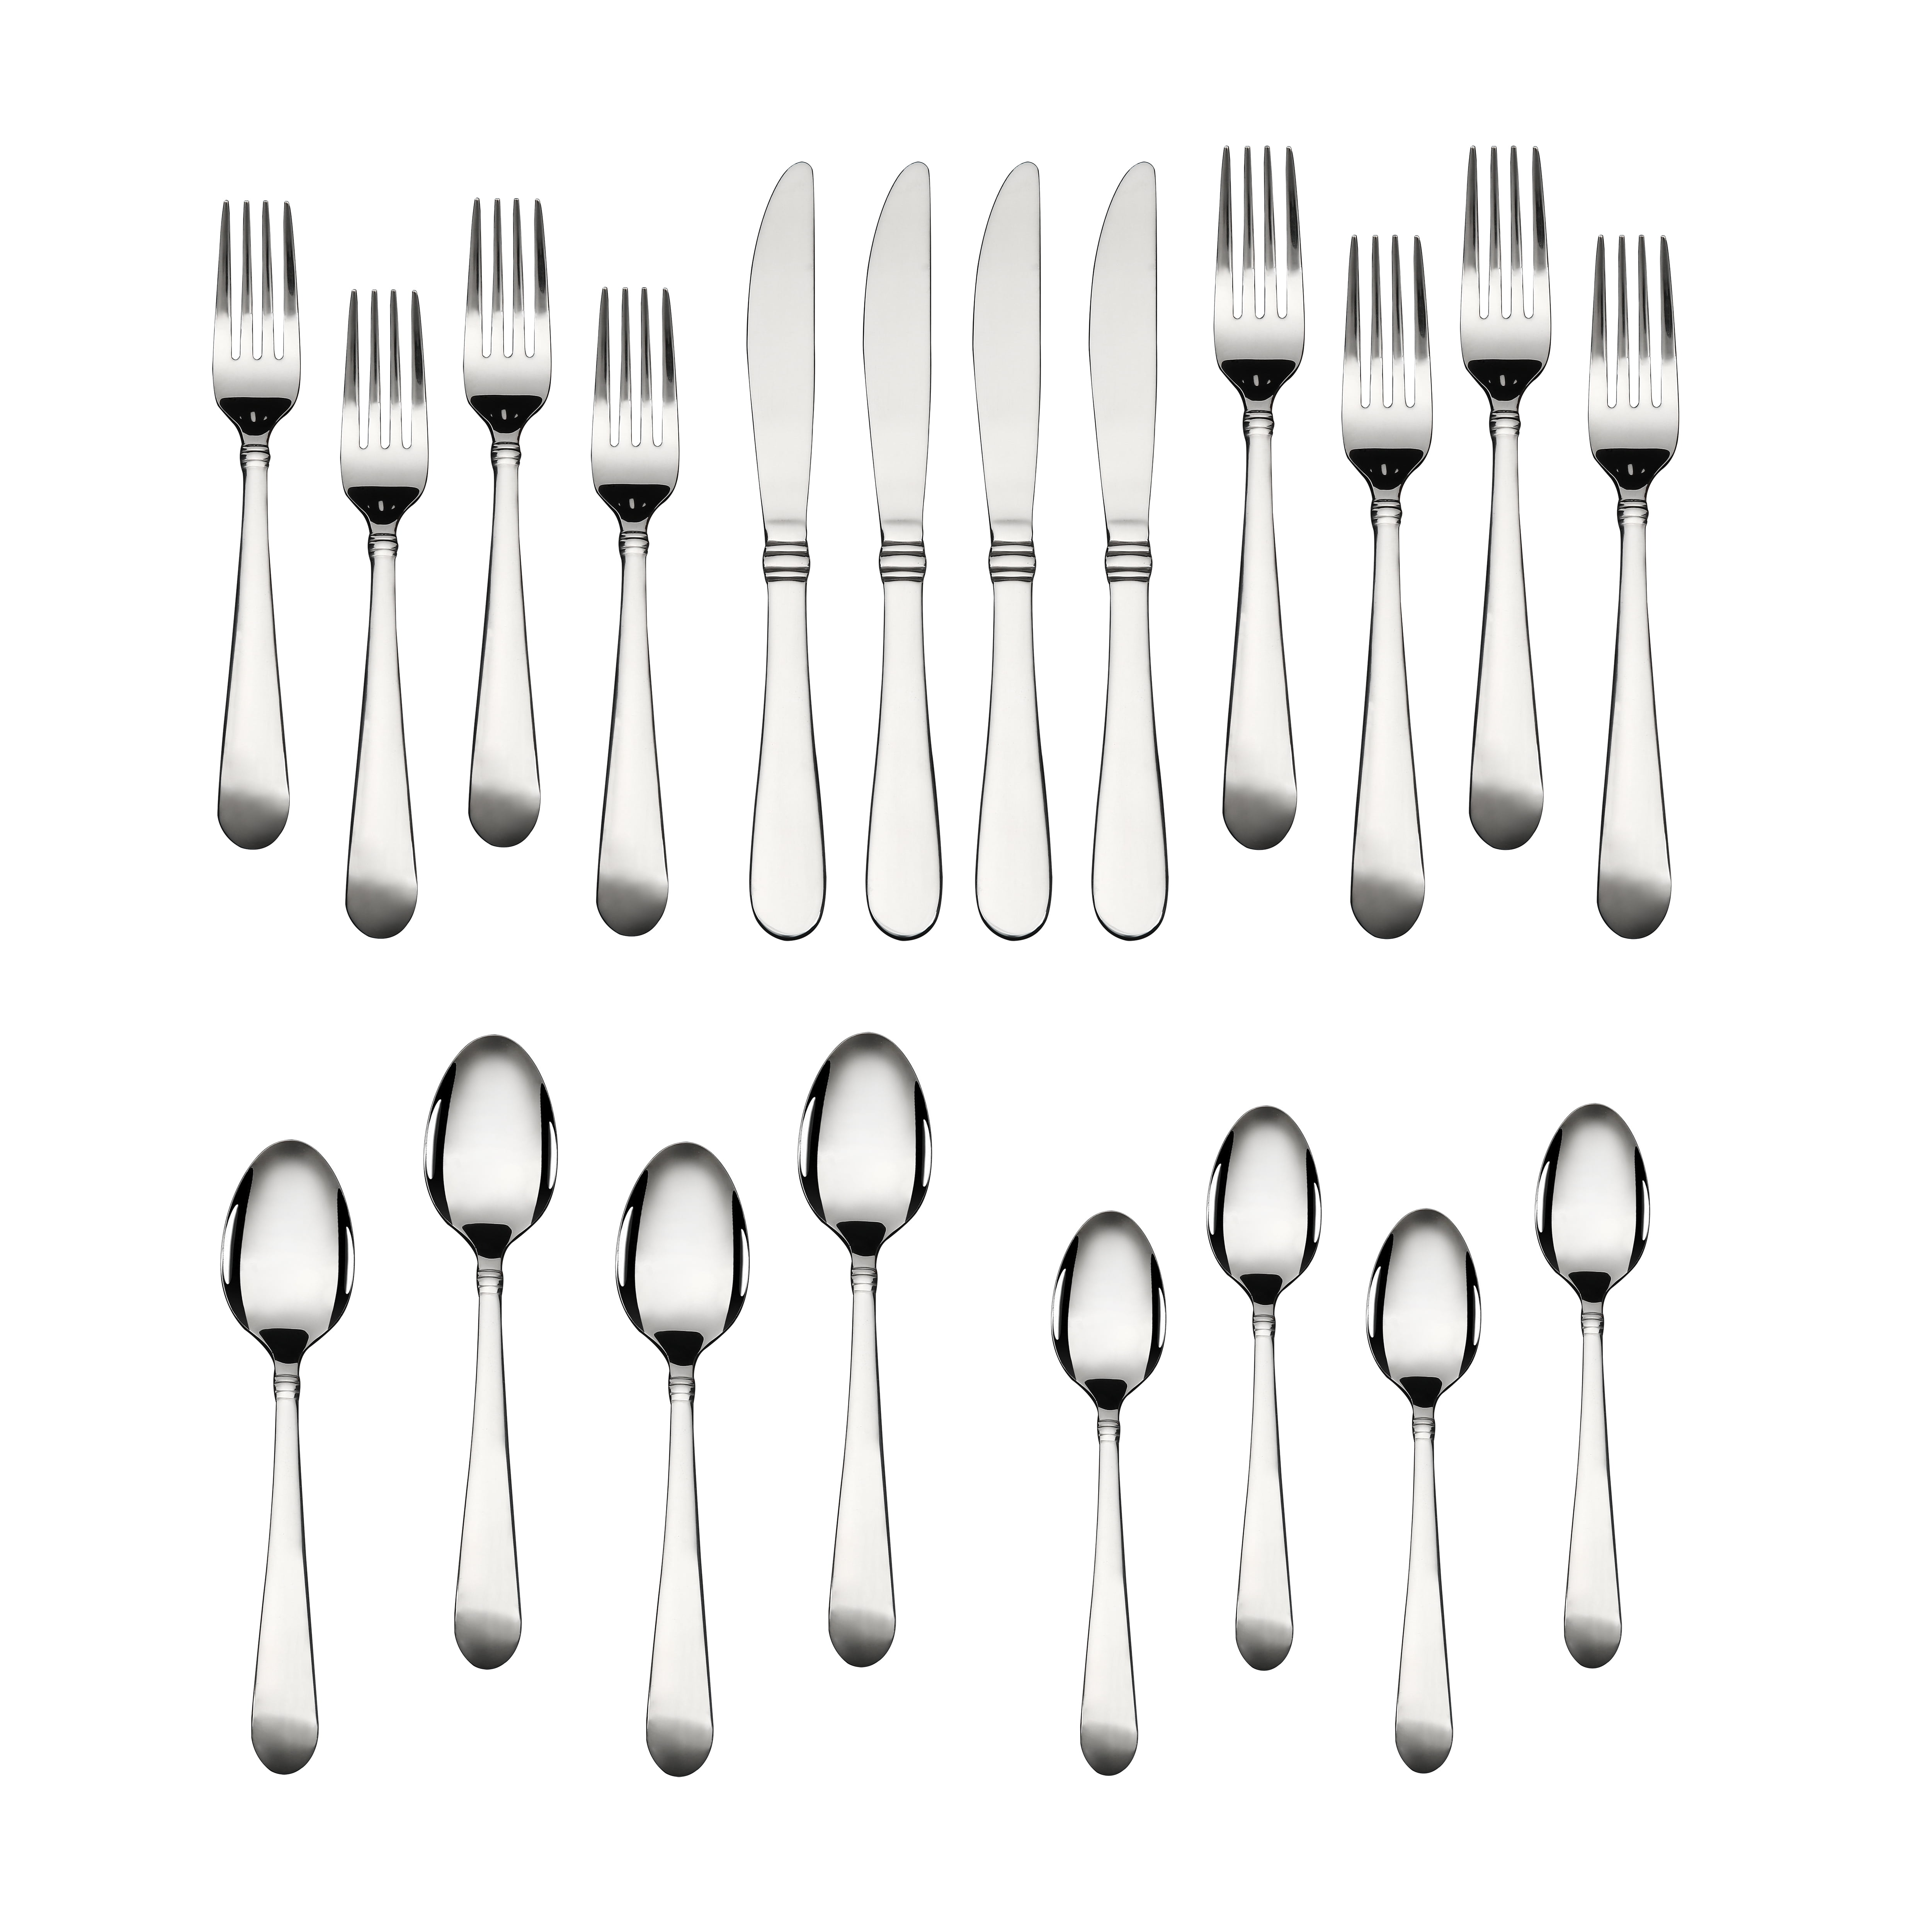 Mainstays Camfield 20 Piece Stainless Steel Flatware Set, Silver Tableware Service for 4